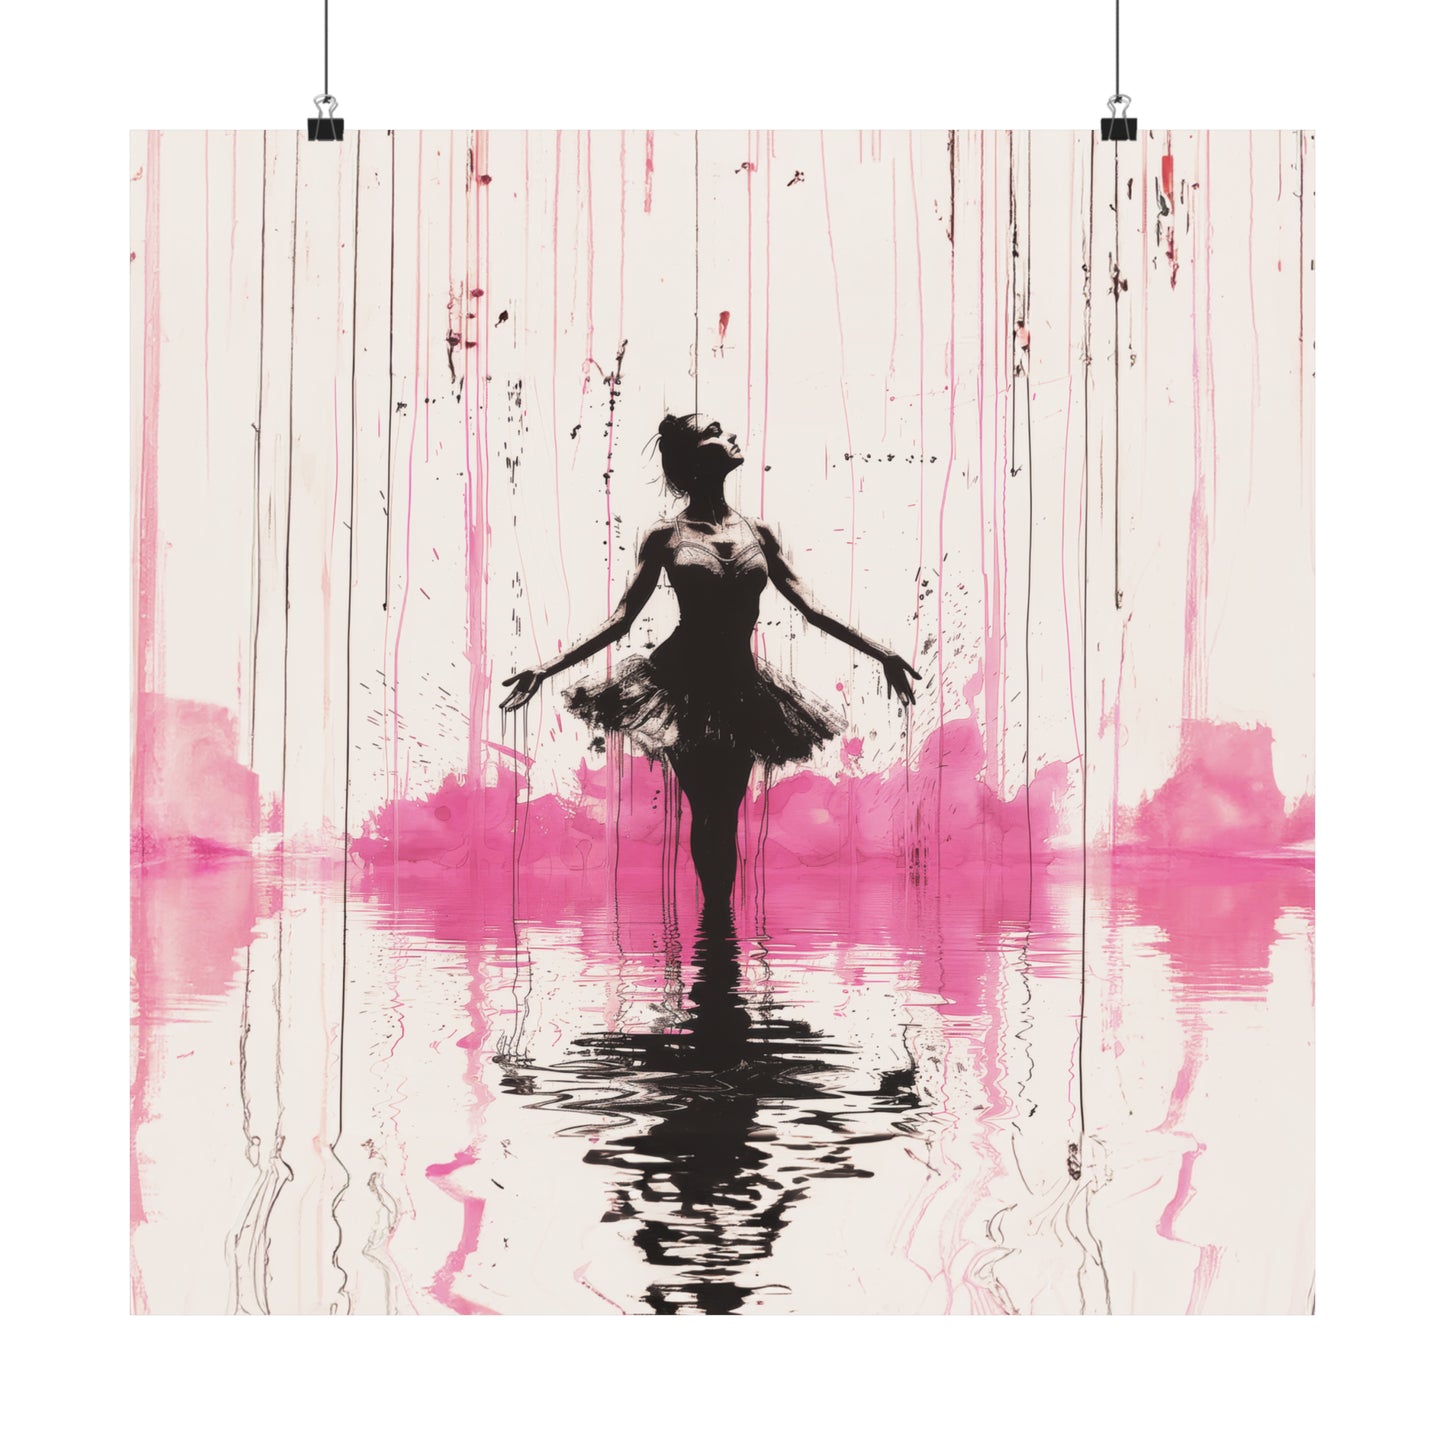 Poetic Elegance: Ballerina Dancing in Pink Rain, Reflecting the Beauty of Ballet Print on Matte Poster - 11 Sizes